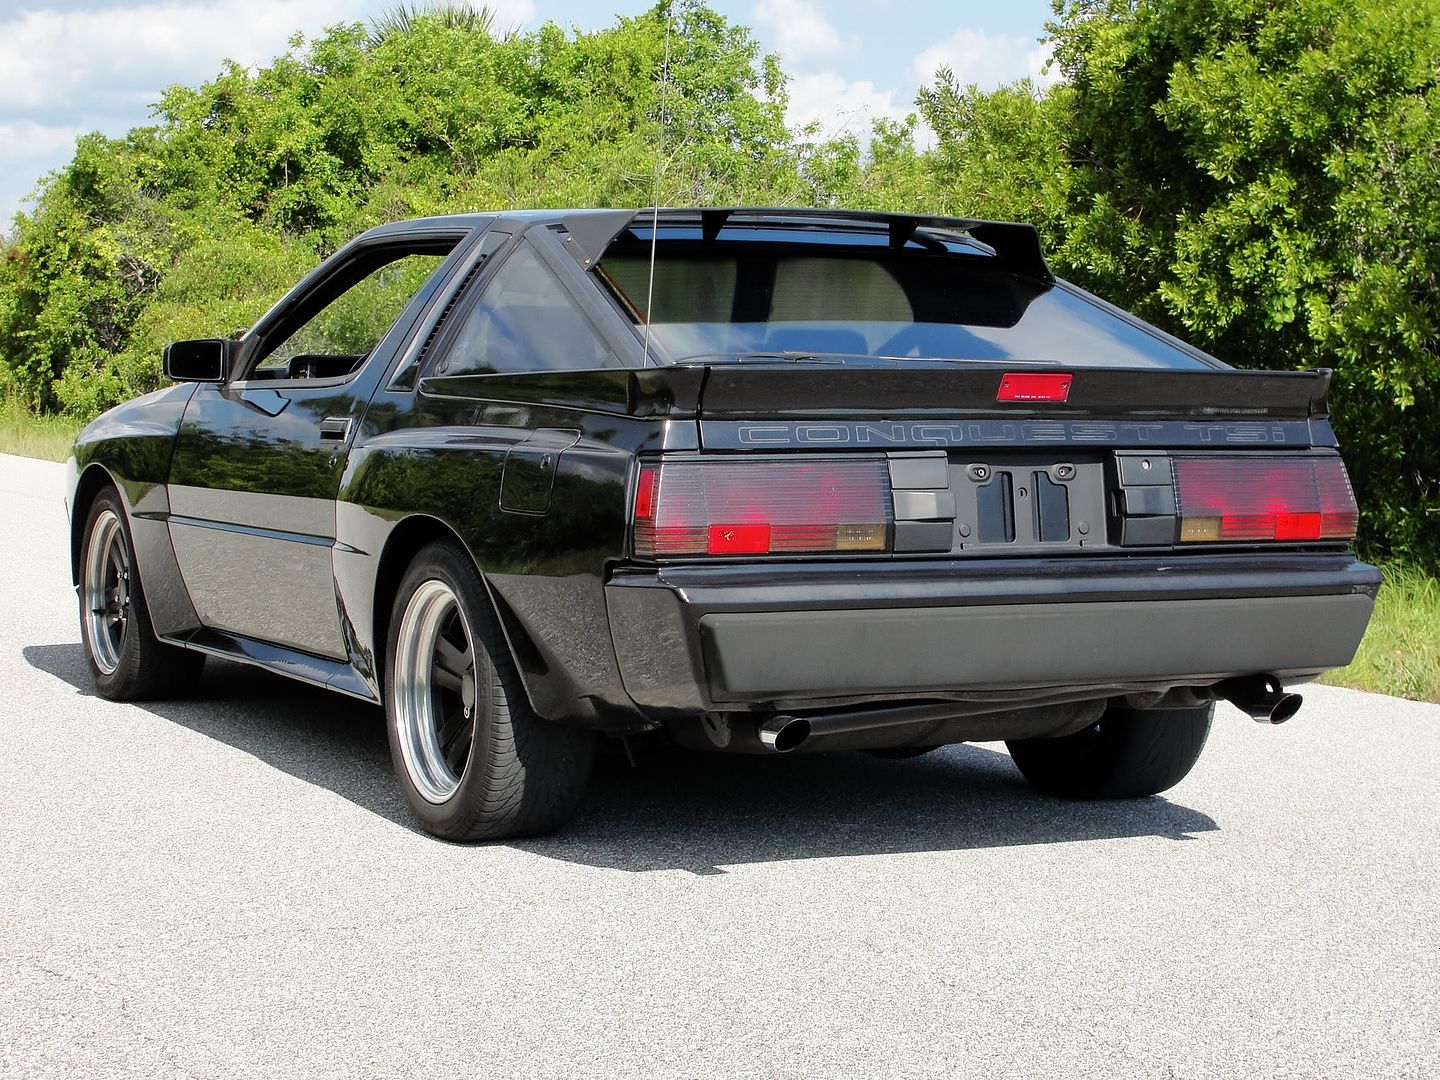 Chrysler conquest for sale in nj #1